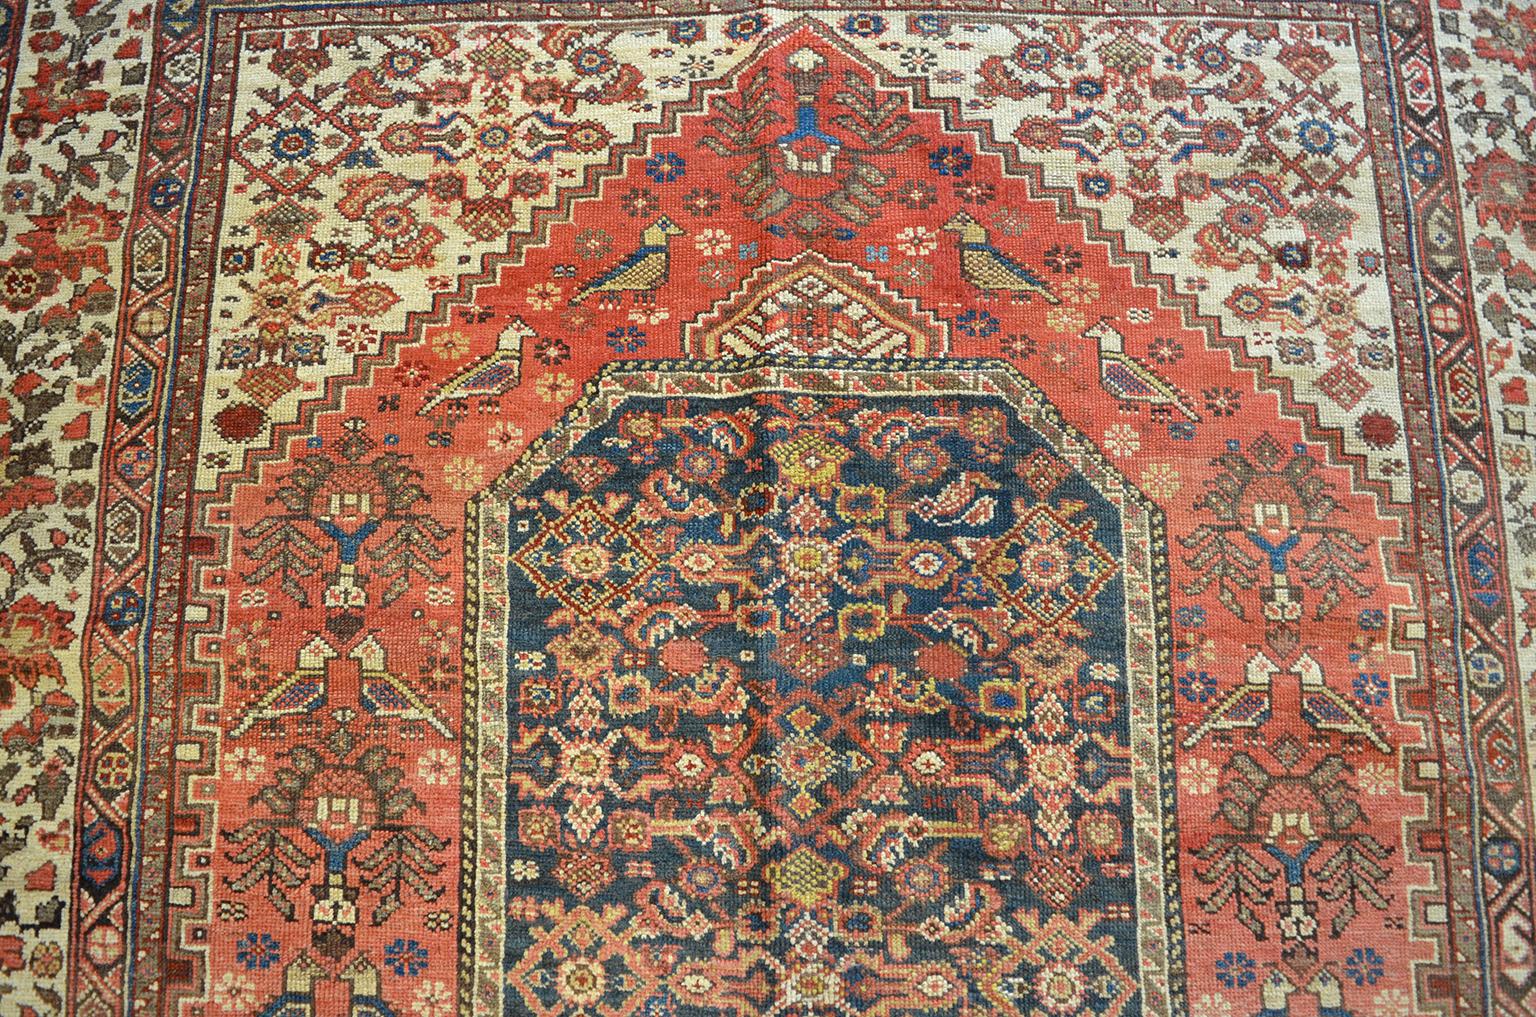 This antique Persian Meeshan Malayer carpet circa 1880 in pure handspun wool and organic vegetable dyes showcases a geometric central medallion design decorated with native birds, flowers and leaves among other symbolic tribal motifs. Completed in